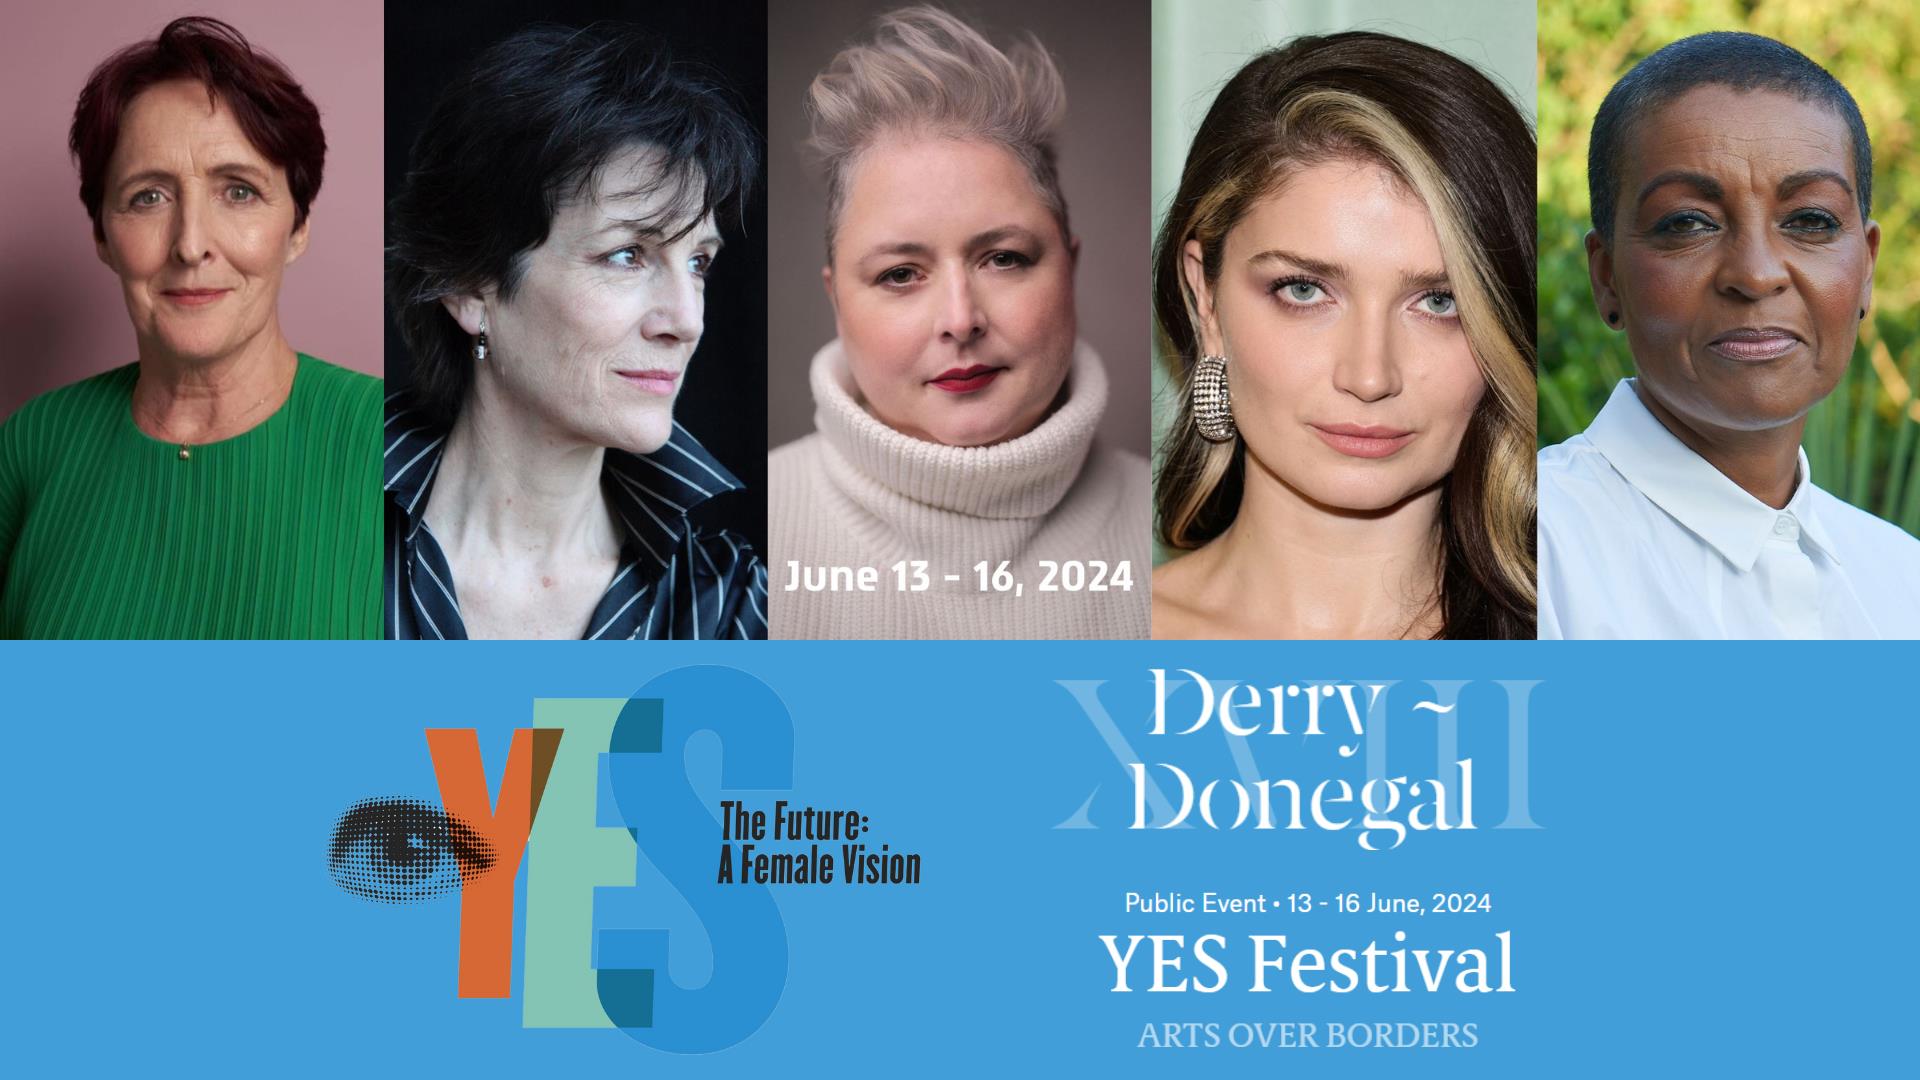 Actresses involved in The Molly Films aspect of the YES Festival